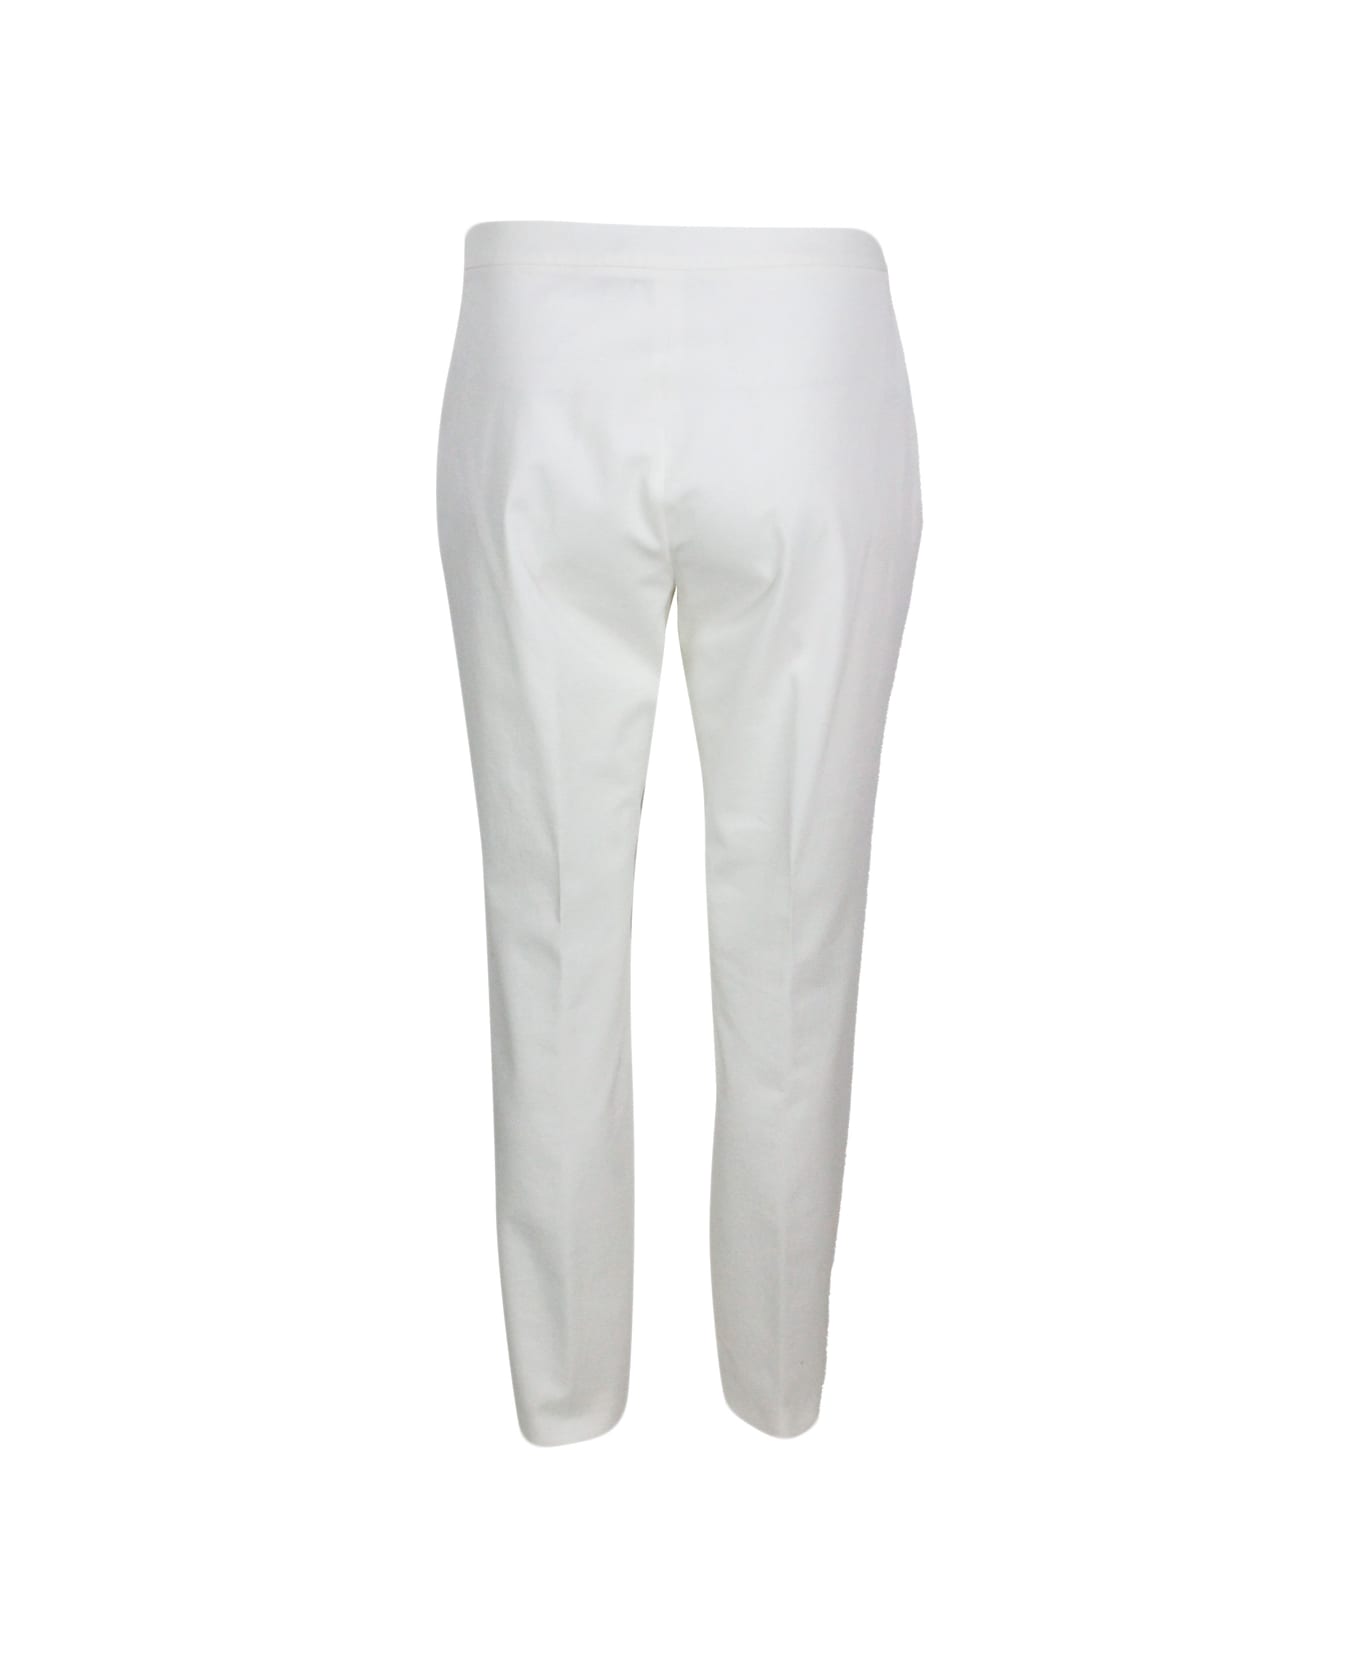 Fabiana Filippi Stretch Cotton Poplin Trousers Are Characterized By A Slim Fit And A Zip Closure On The Side - White